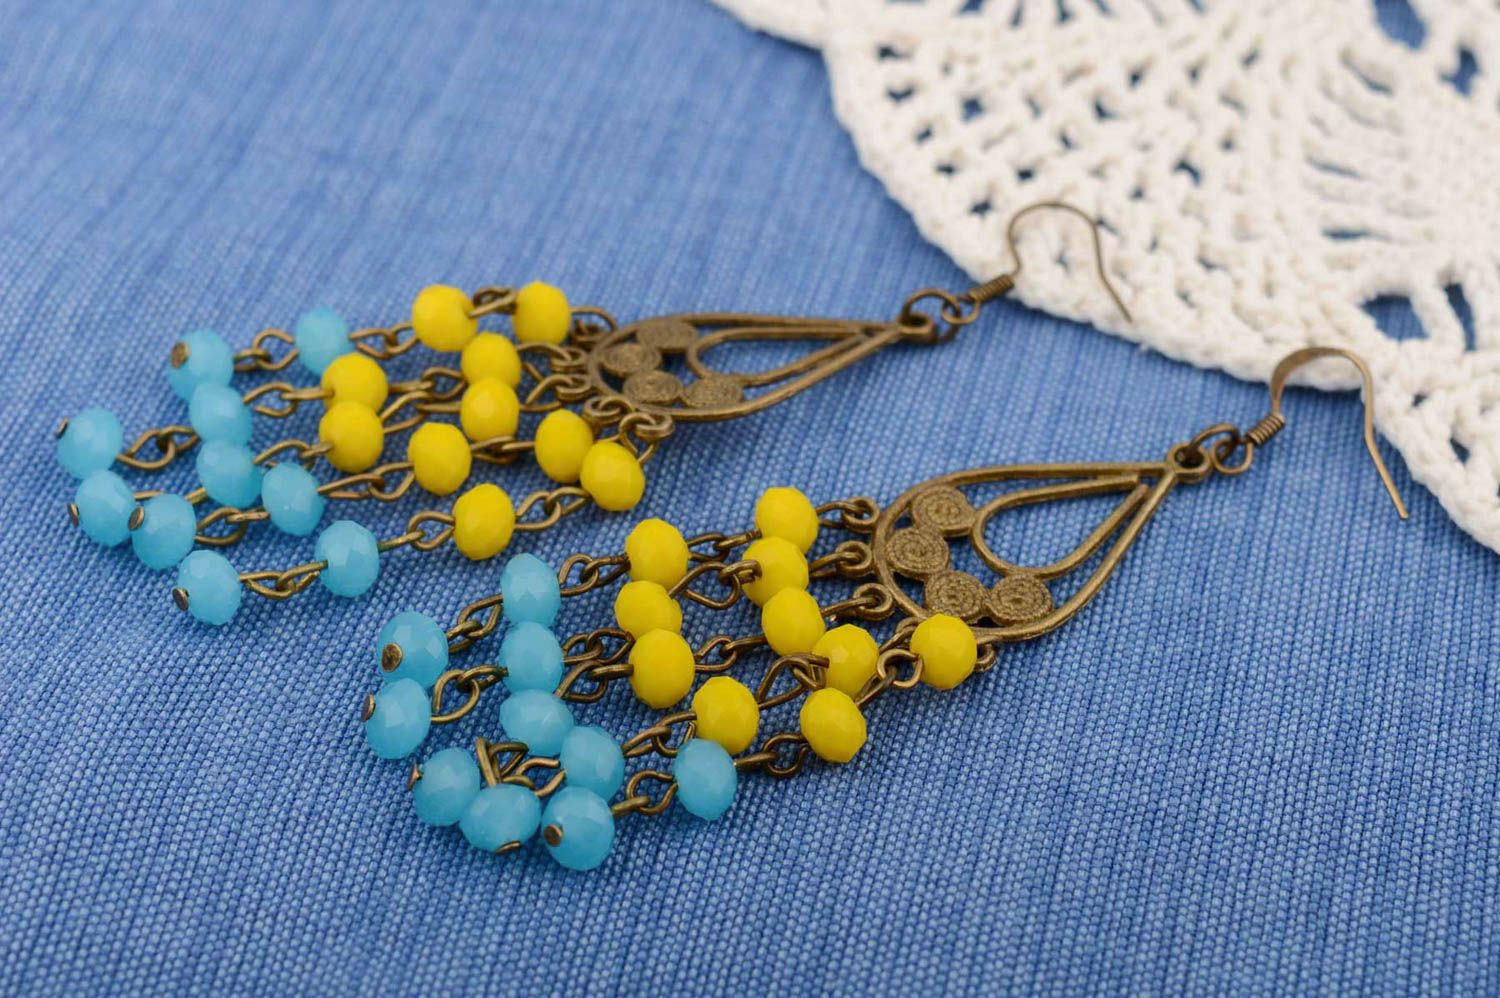 Handmade metal earrings with beads made of Czech crystal in Gypsy style photo 1